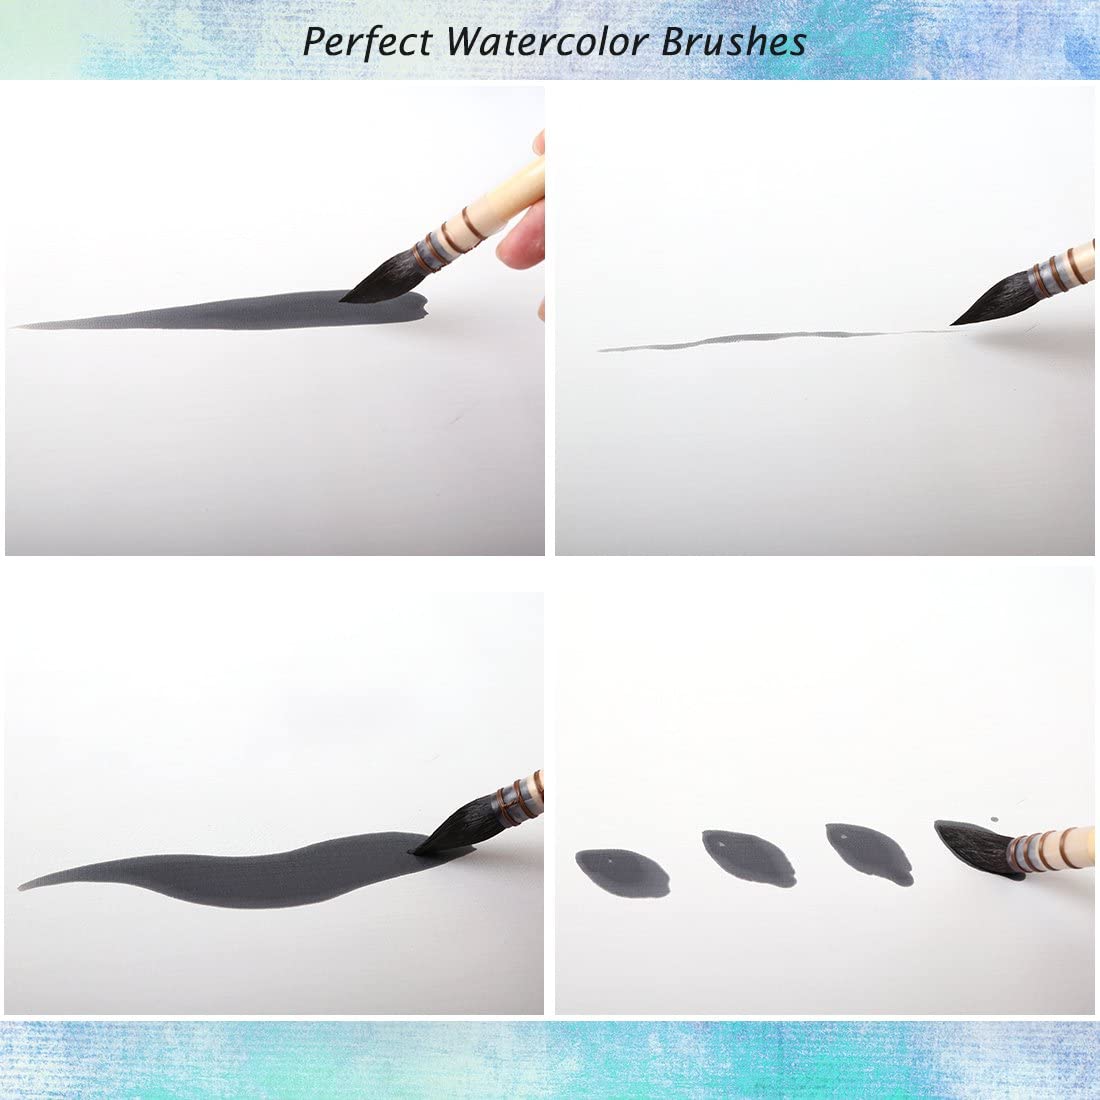 Dainayw Watercolor Paint Brushes strokes